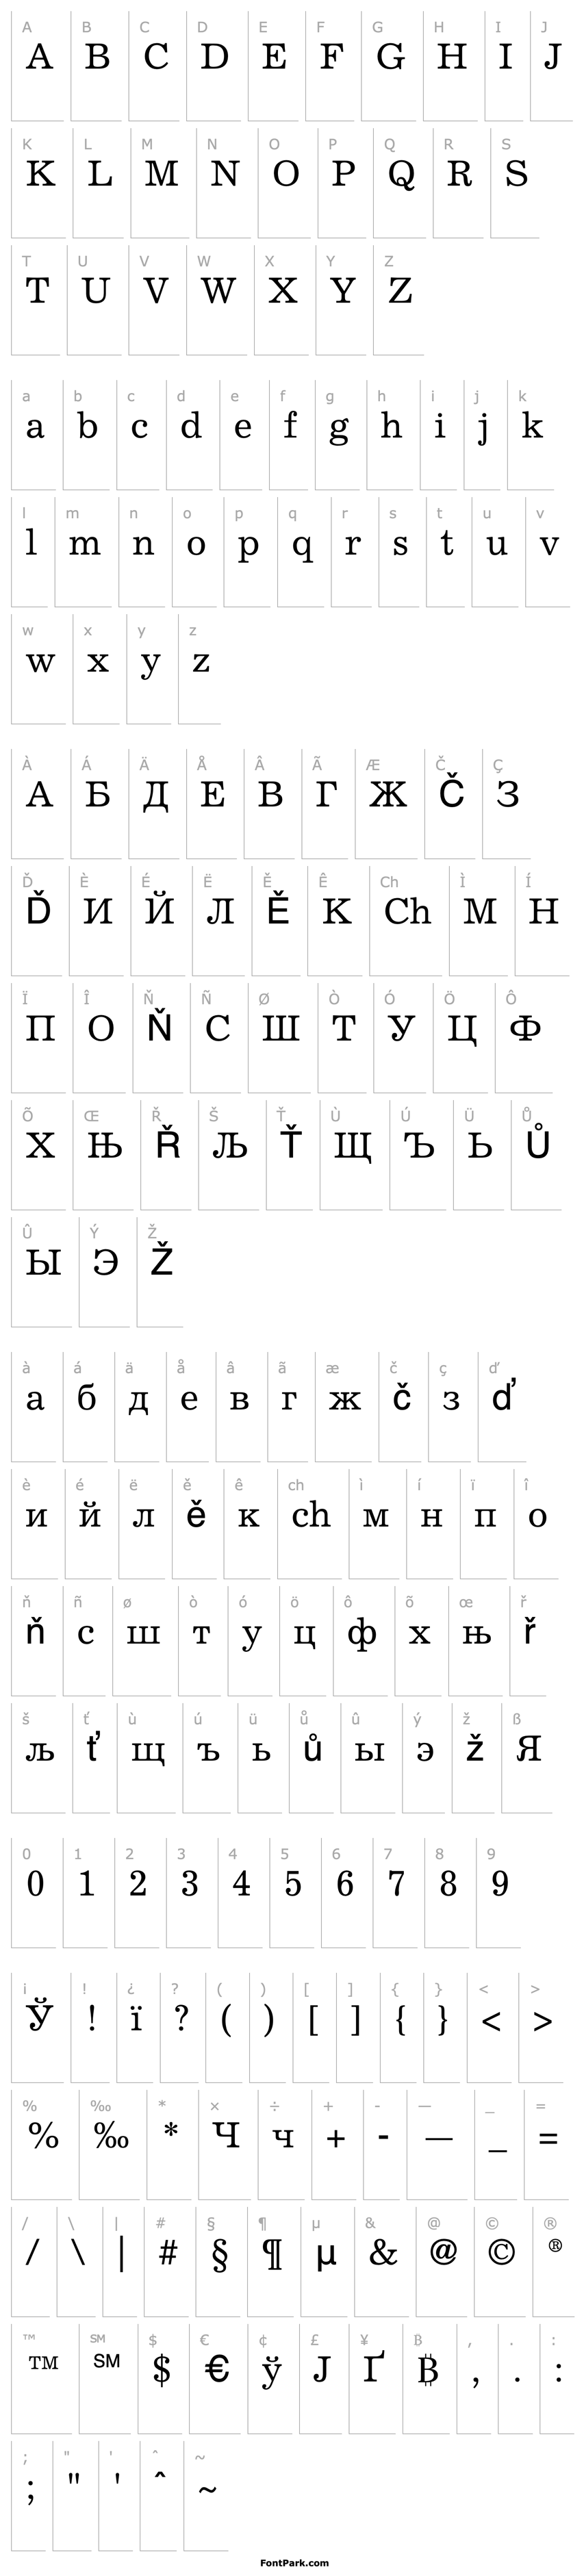 Overview Excelsior Cyrillic Upright